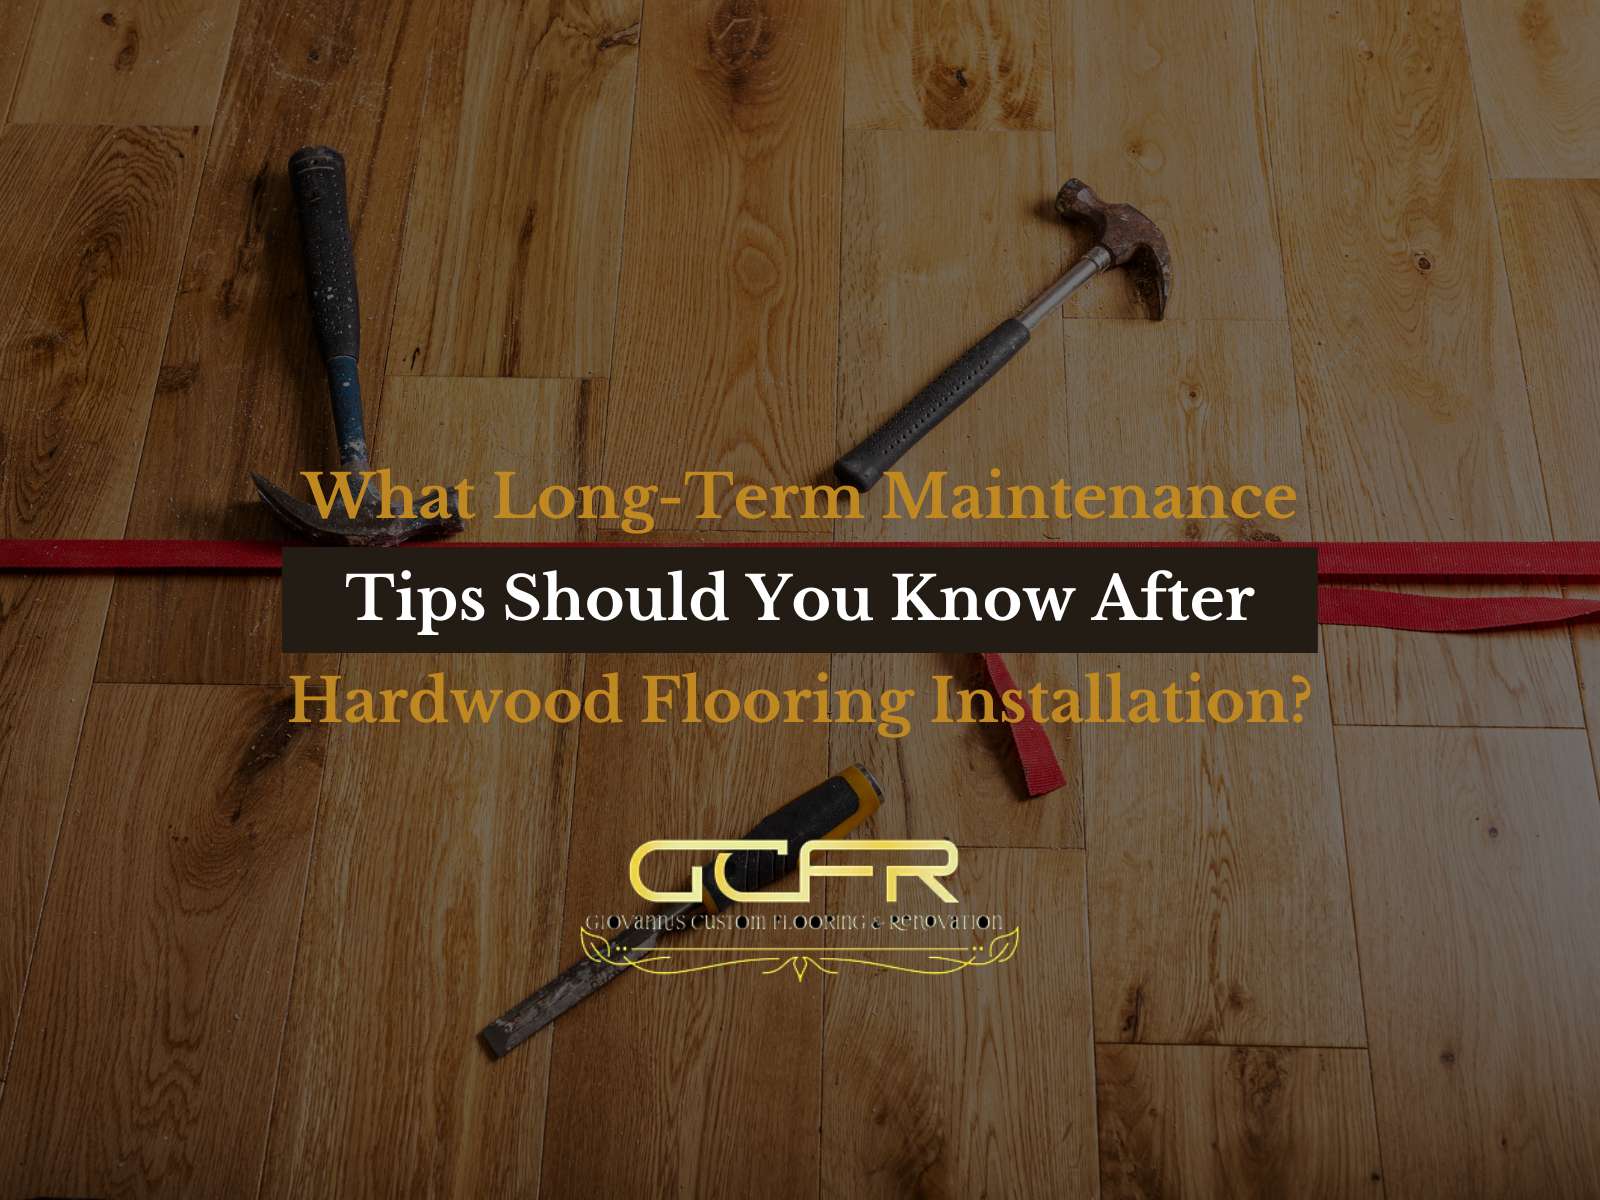 What Long-Term Maintenance Tips Should You Know After Hardwood Flooring Installation